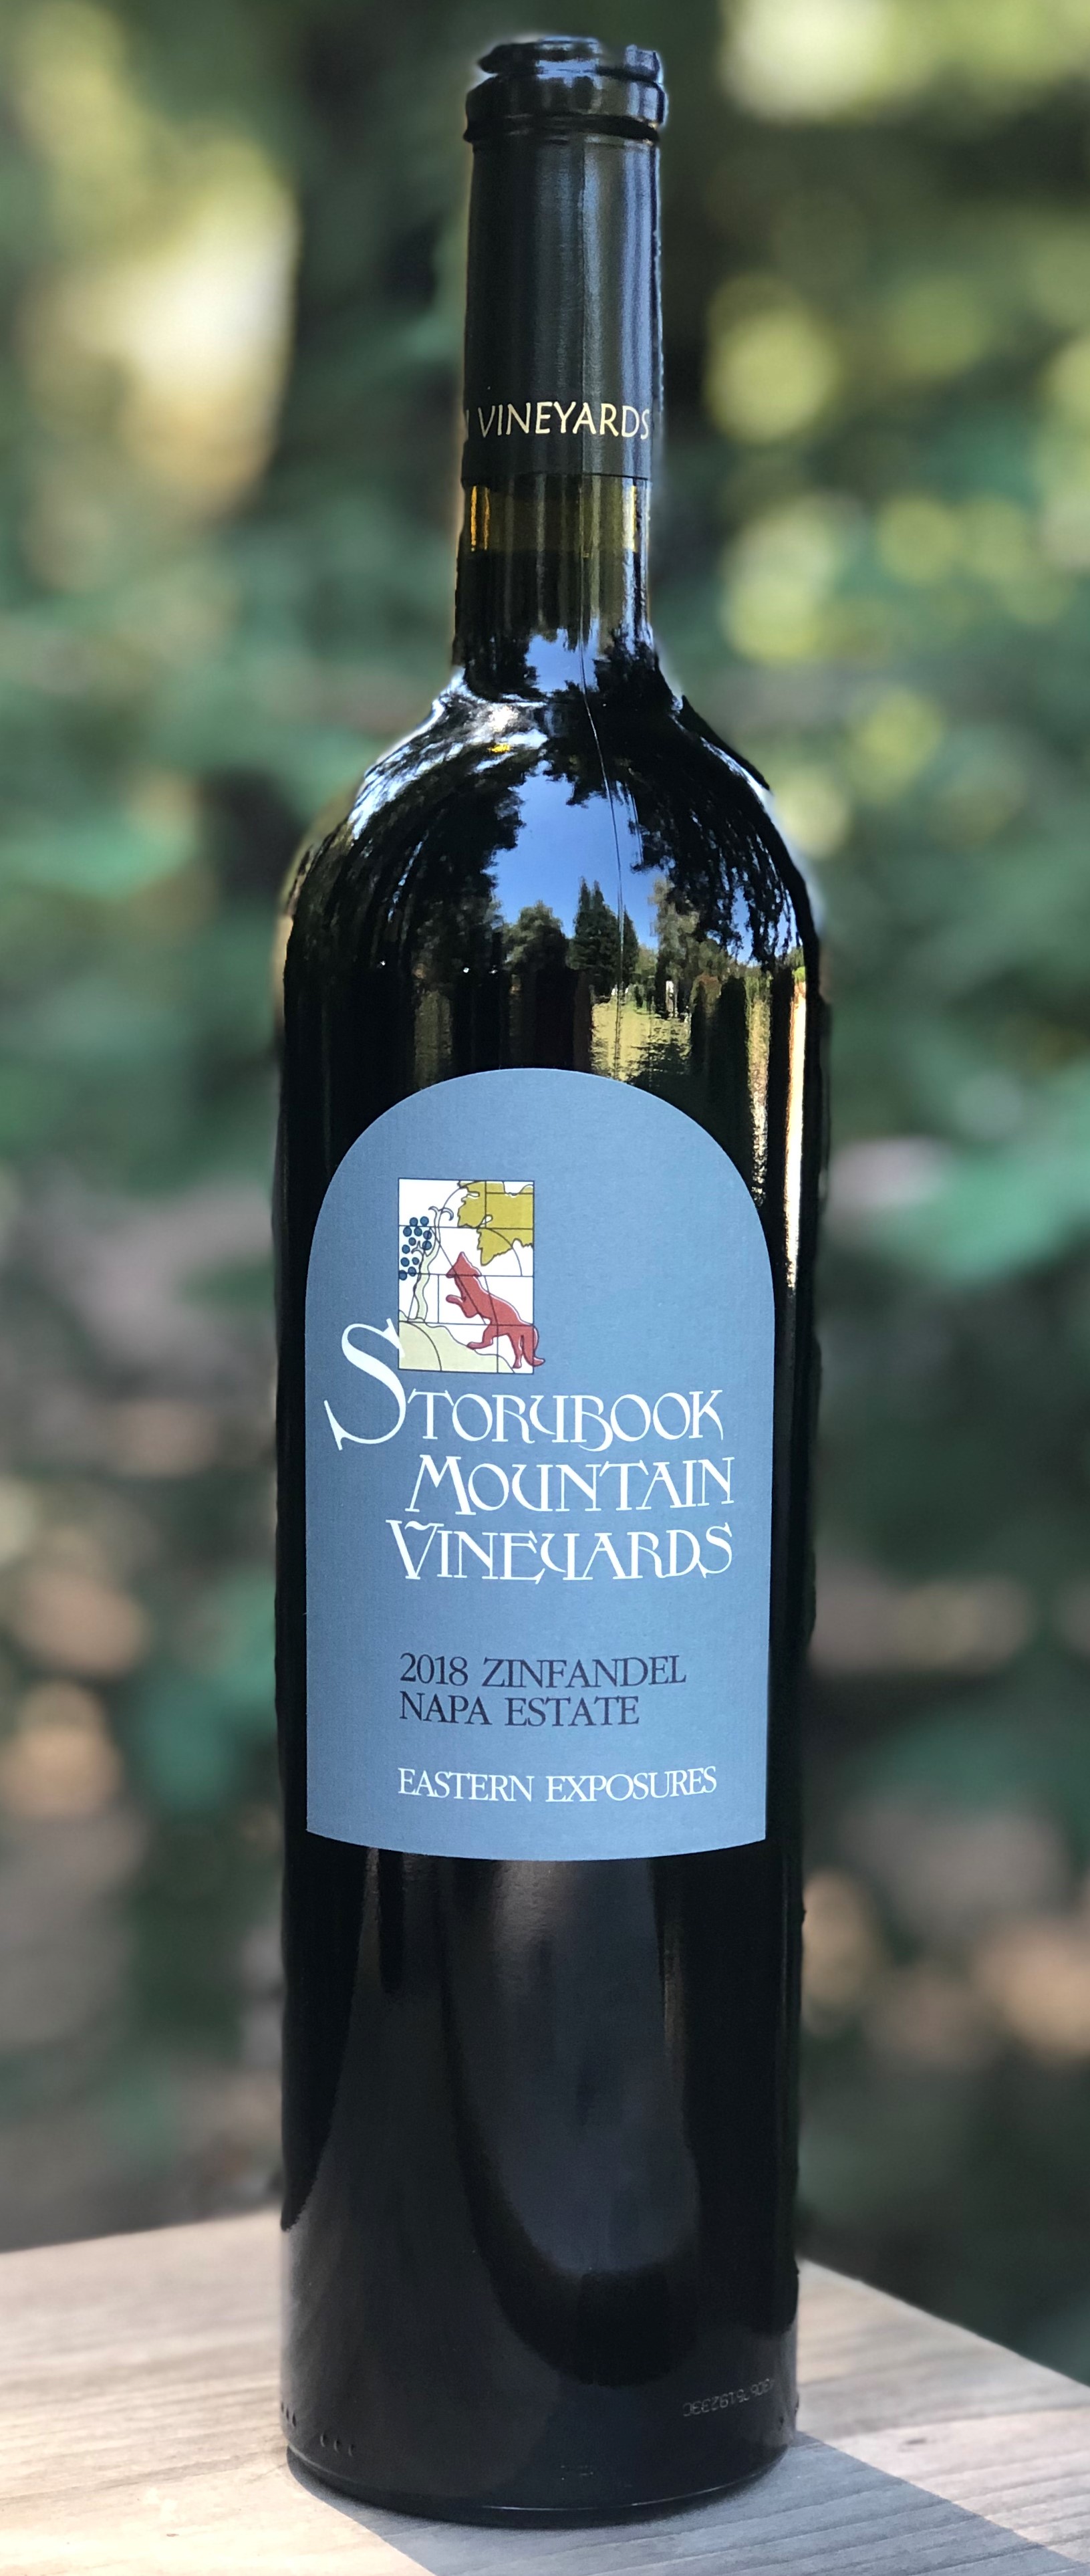 Product Image for 2019 Eastern Exposures Zinfandel